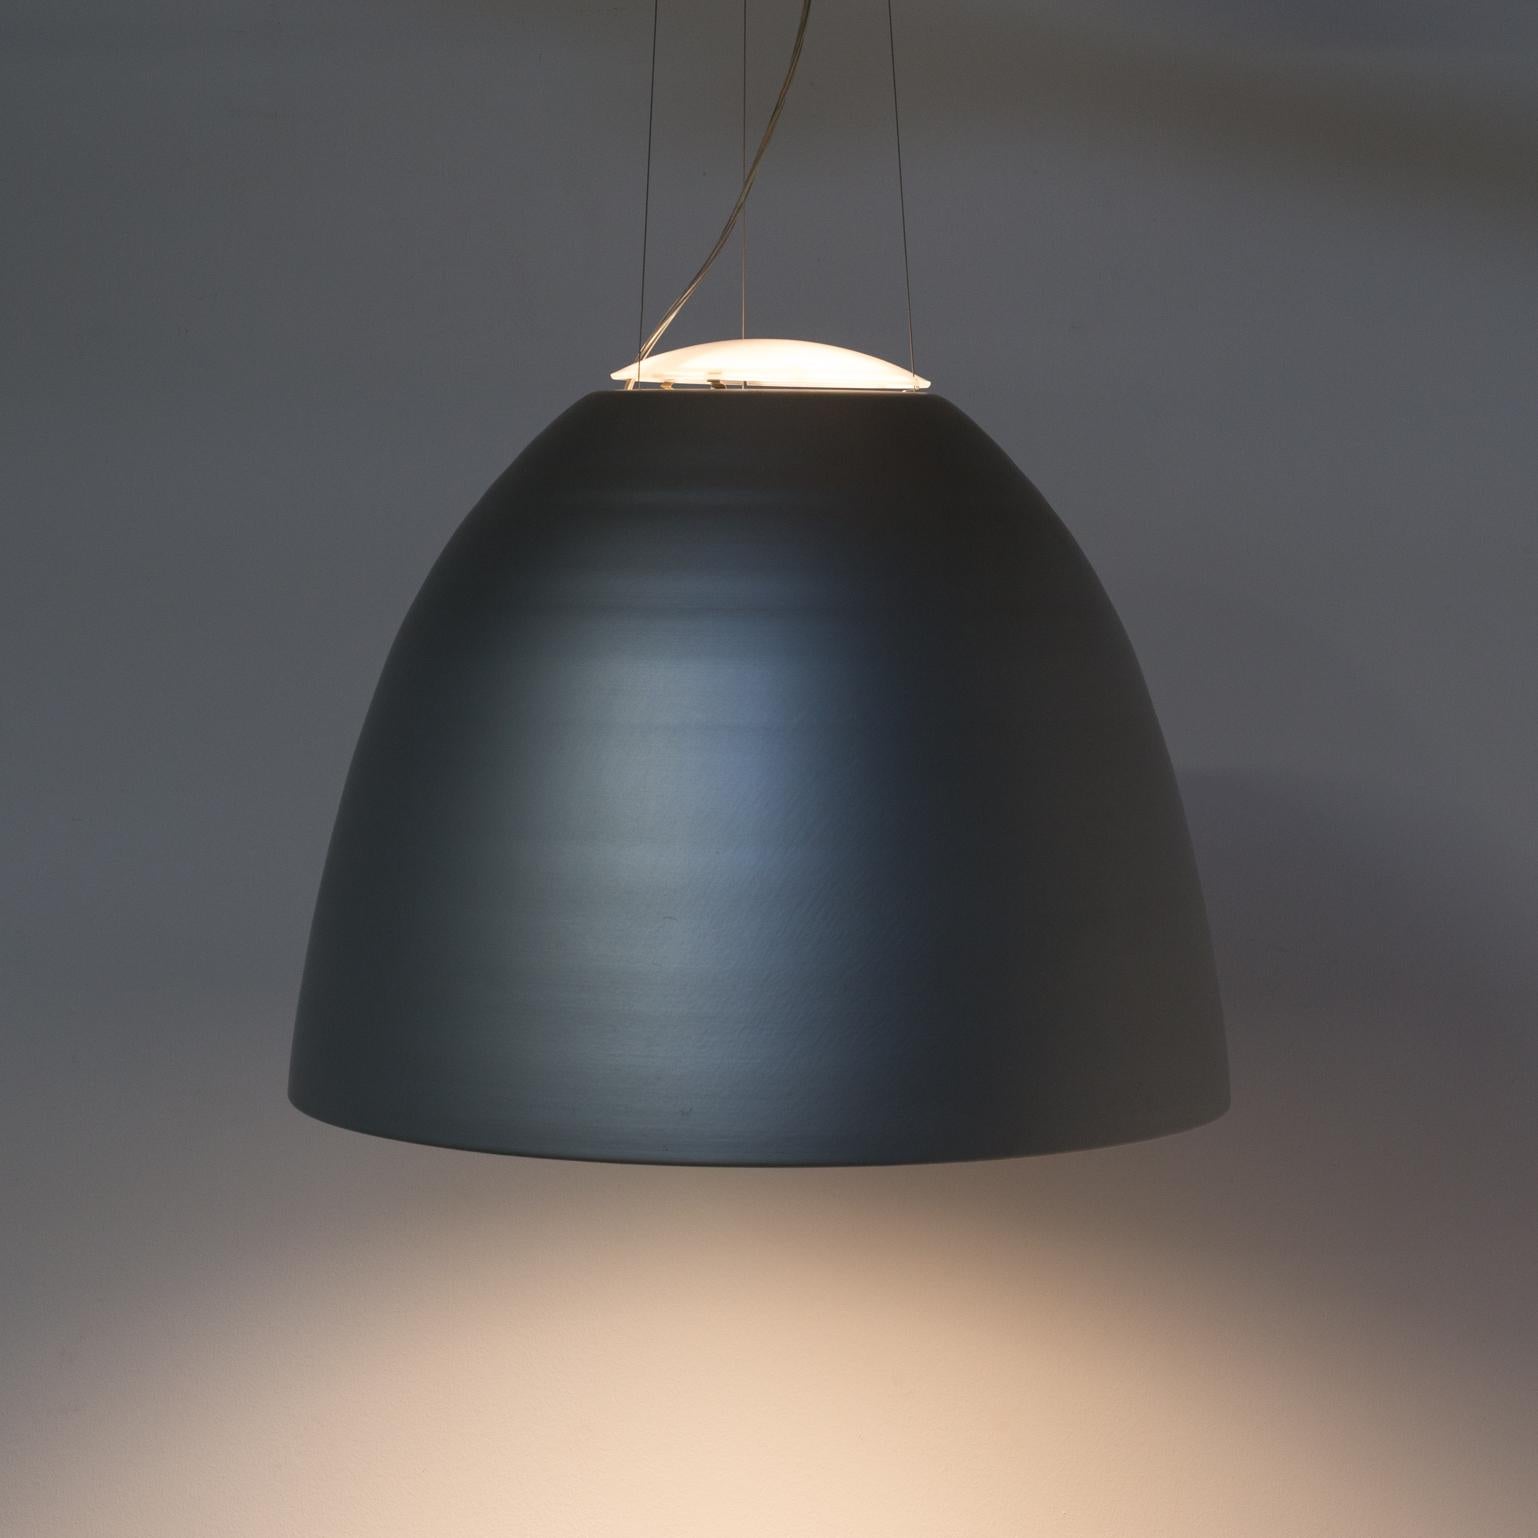 Ernesto Gismondi ‘NUR’ dimmable hanging lamp for Artemide. Good and working condition, dimmable, halogen lamp, first edition, consistent with age and use.